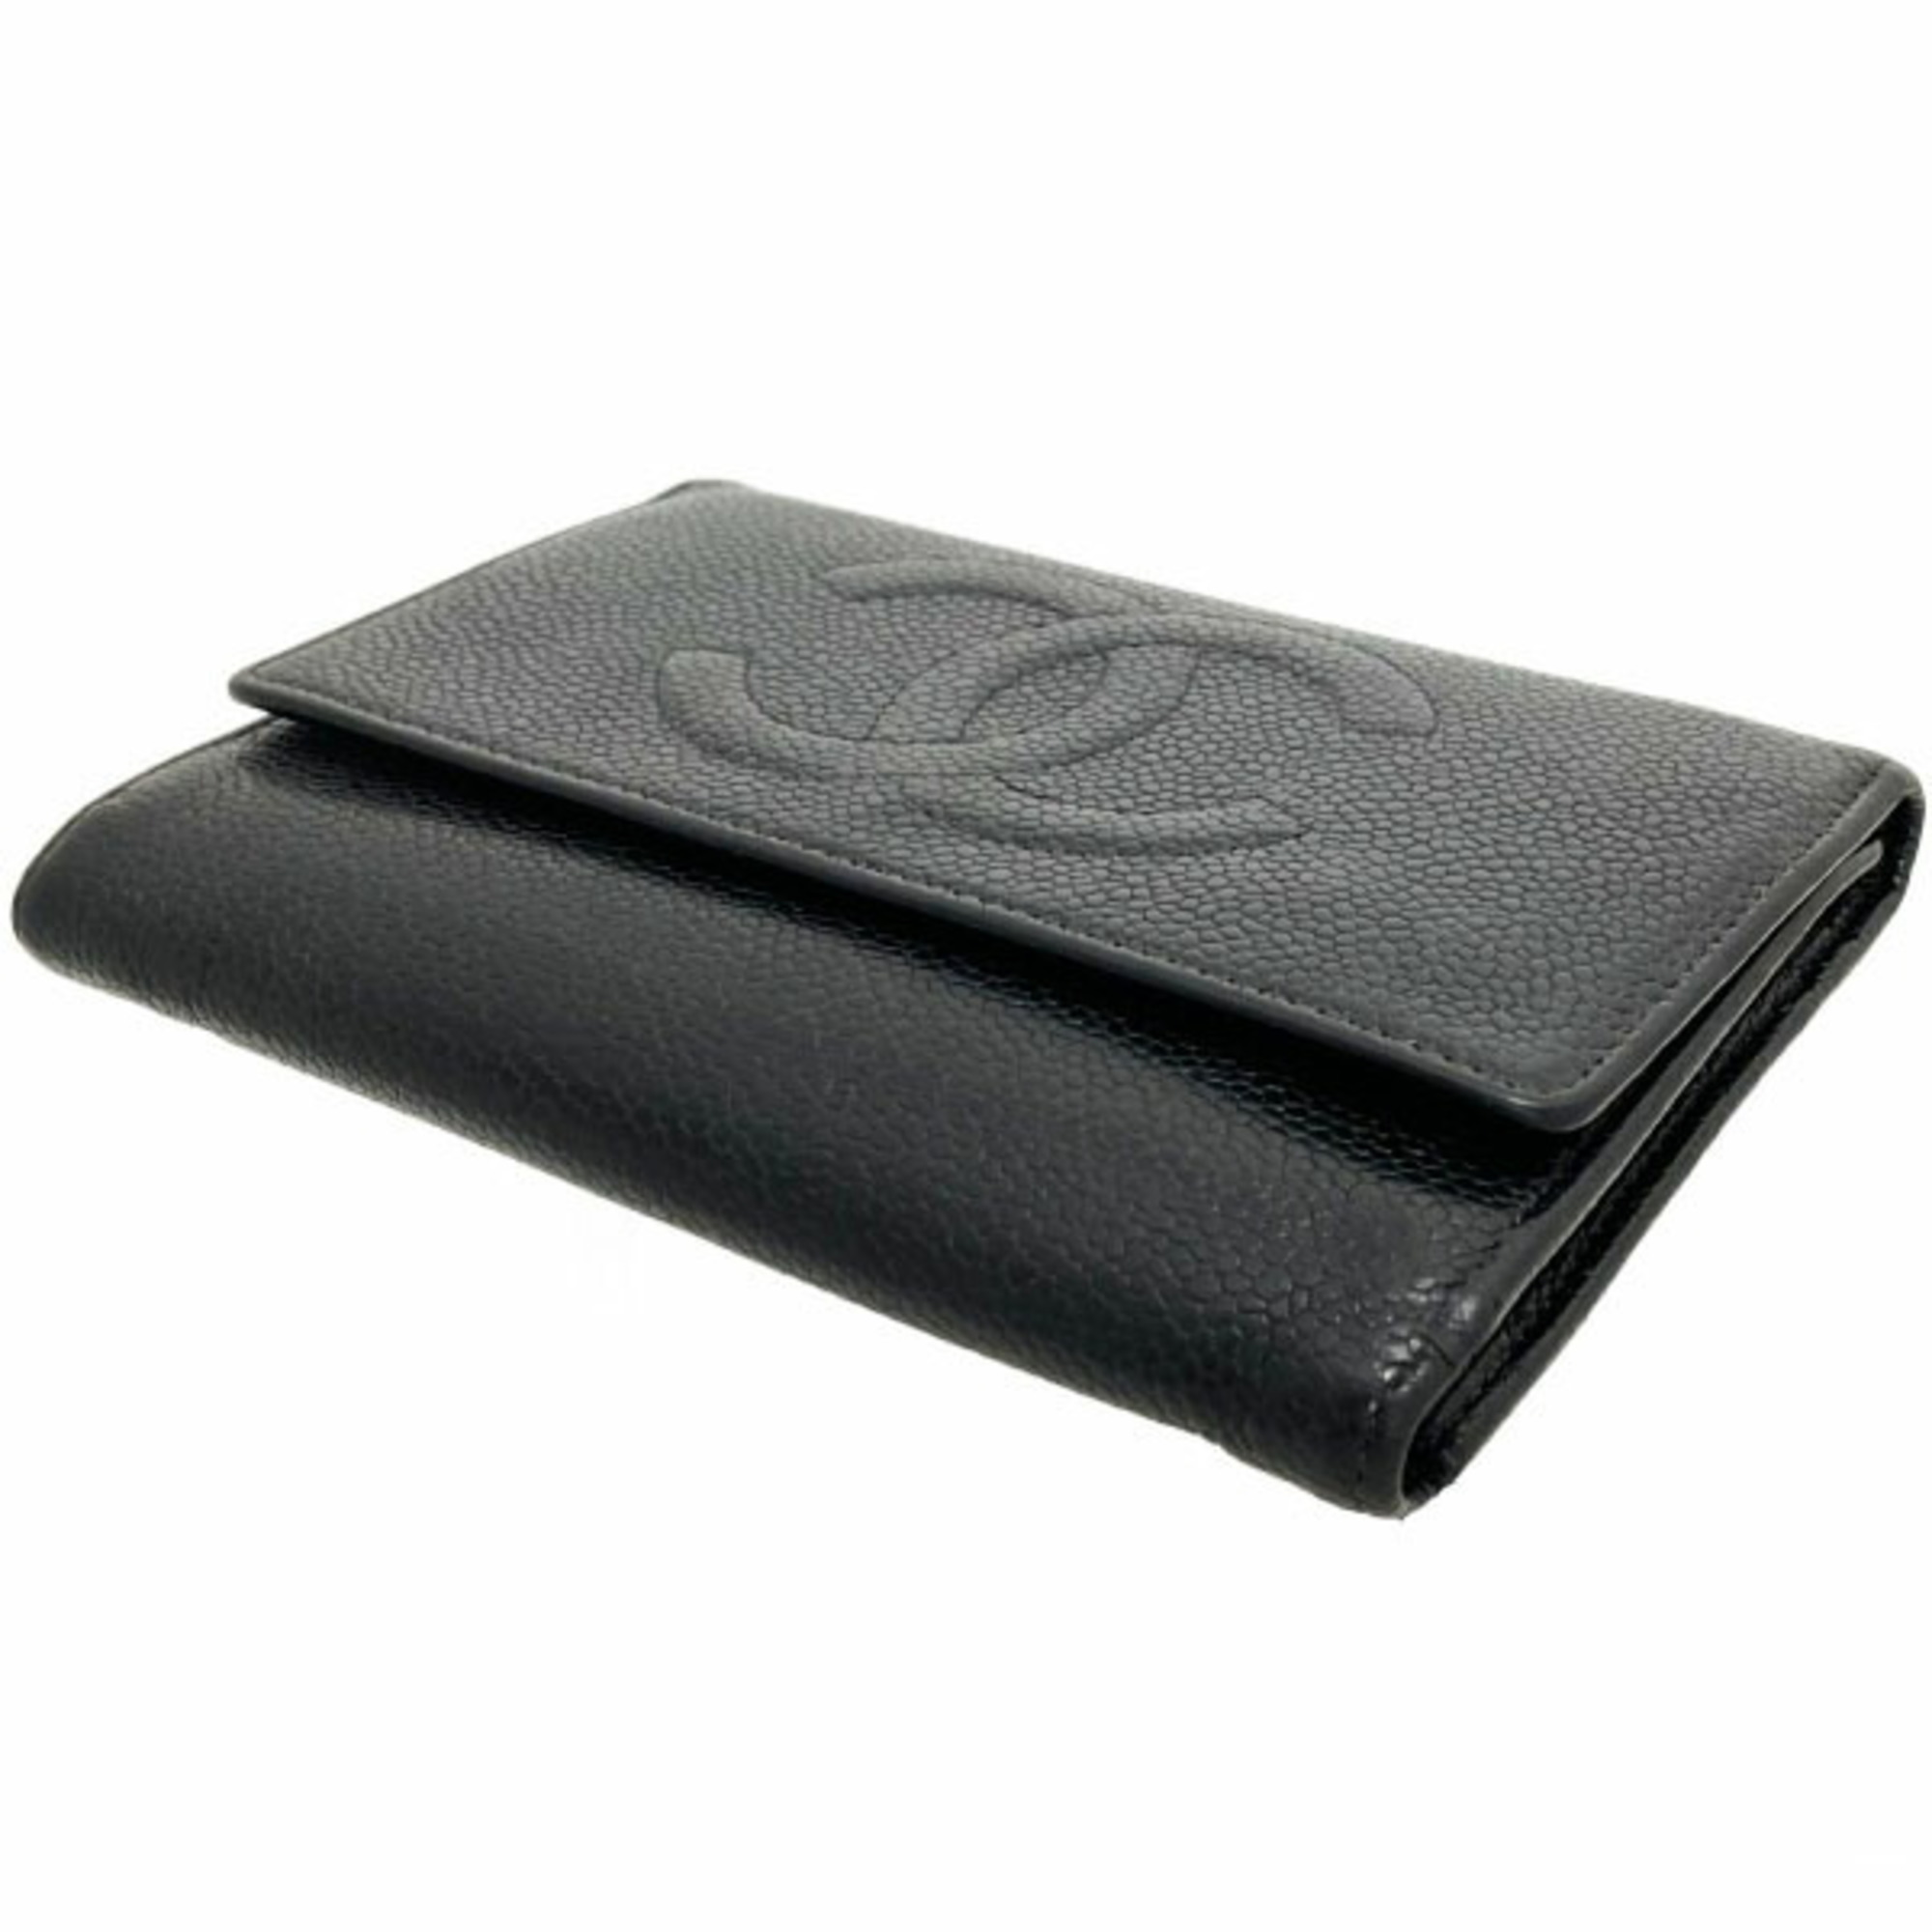 CHANEL Wallet Coco Mark Trifold Caviar Skin Leather Black A13225 CC Medium Middle Women's RR-13147